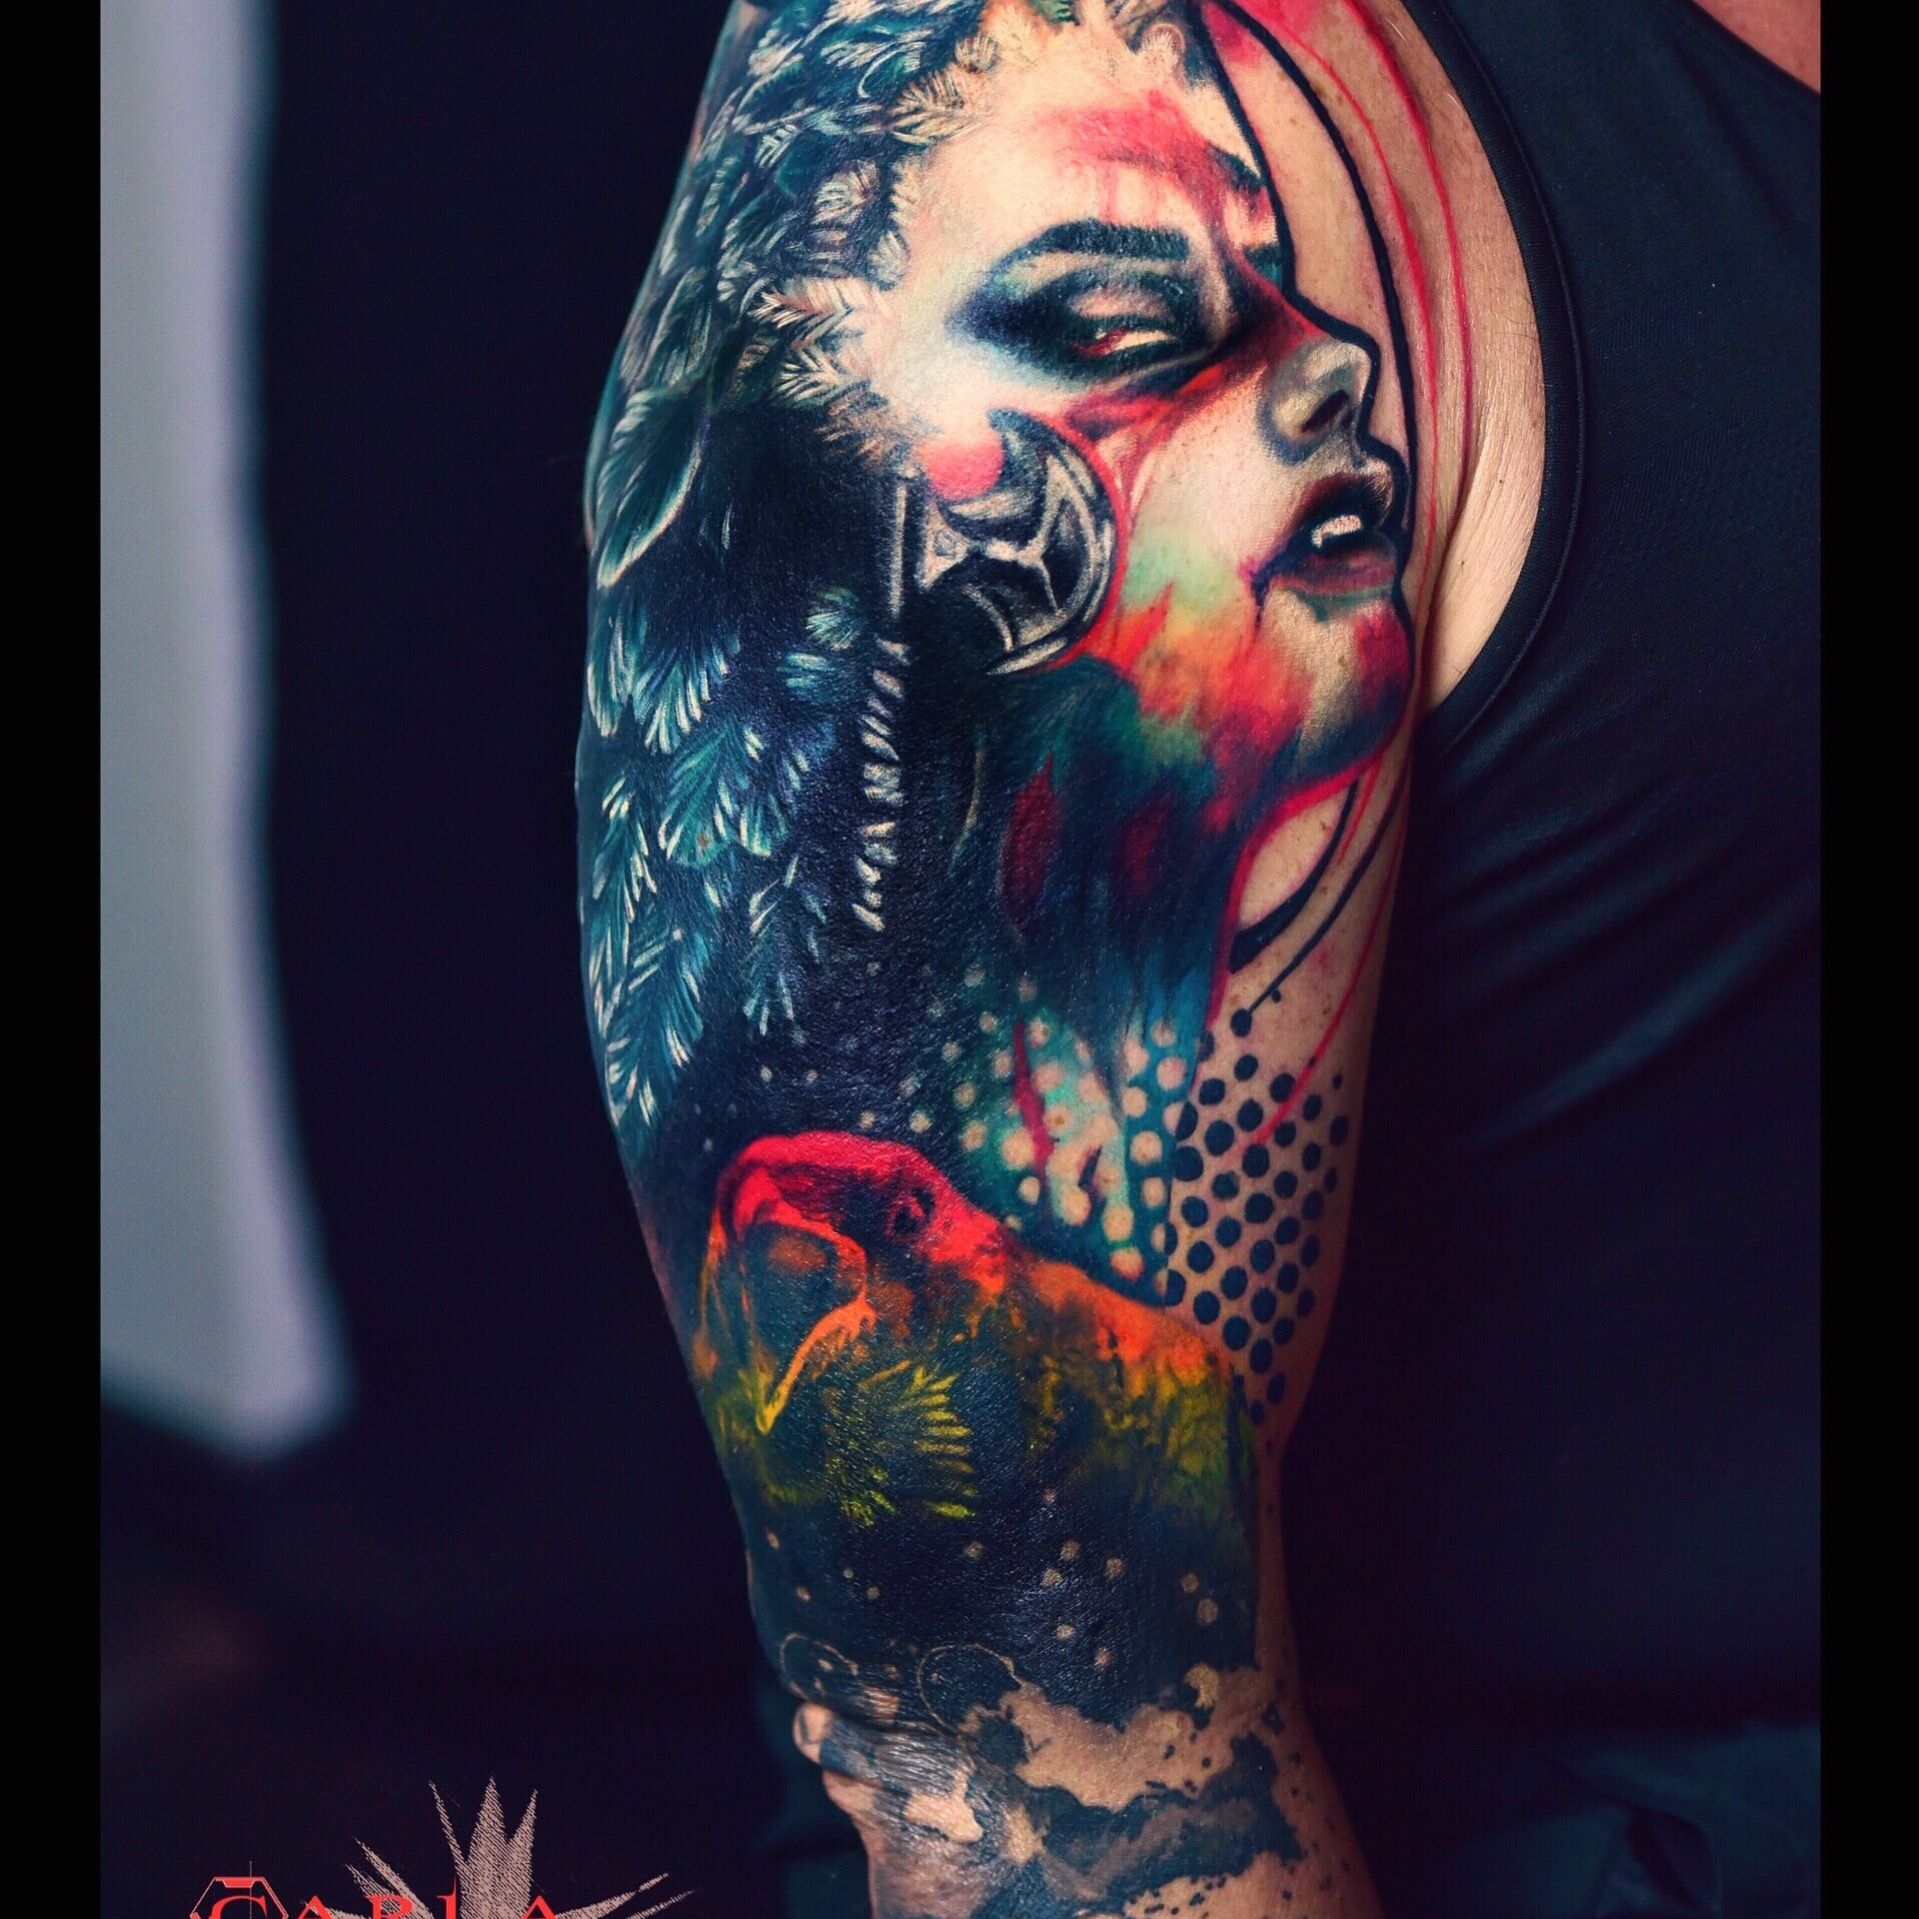 Tattoo uploaded by Tye Tremblay  THE MORRIGAN The Morrígan was the Irish  goddess of death and destiny Appearing before great battles as the goddess  of fate the Morrígan offered prophecy and